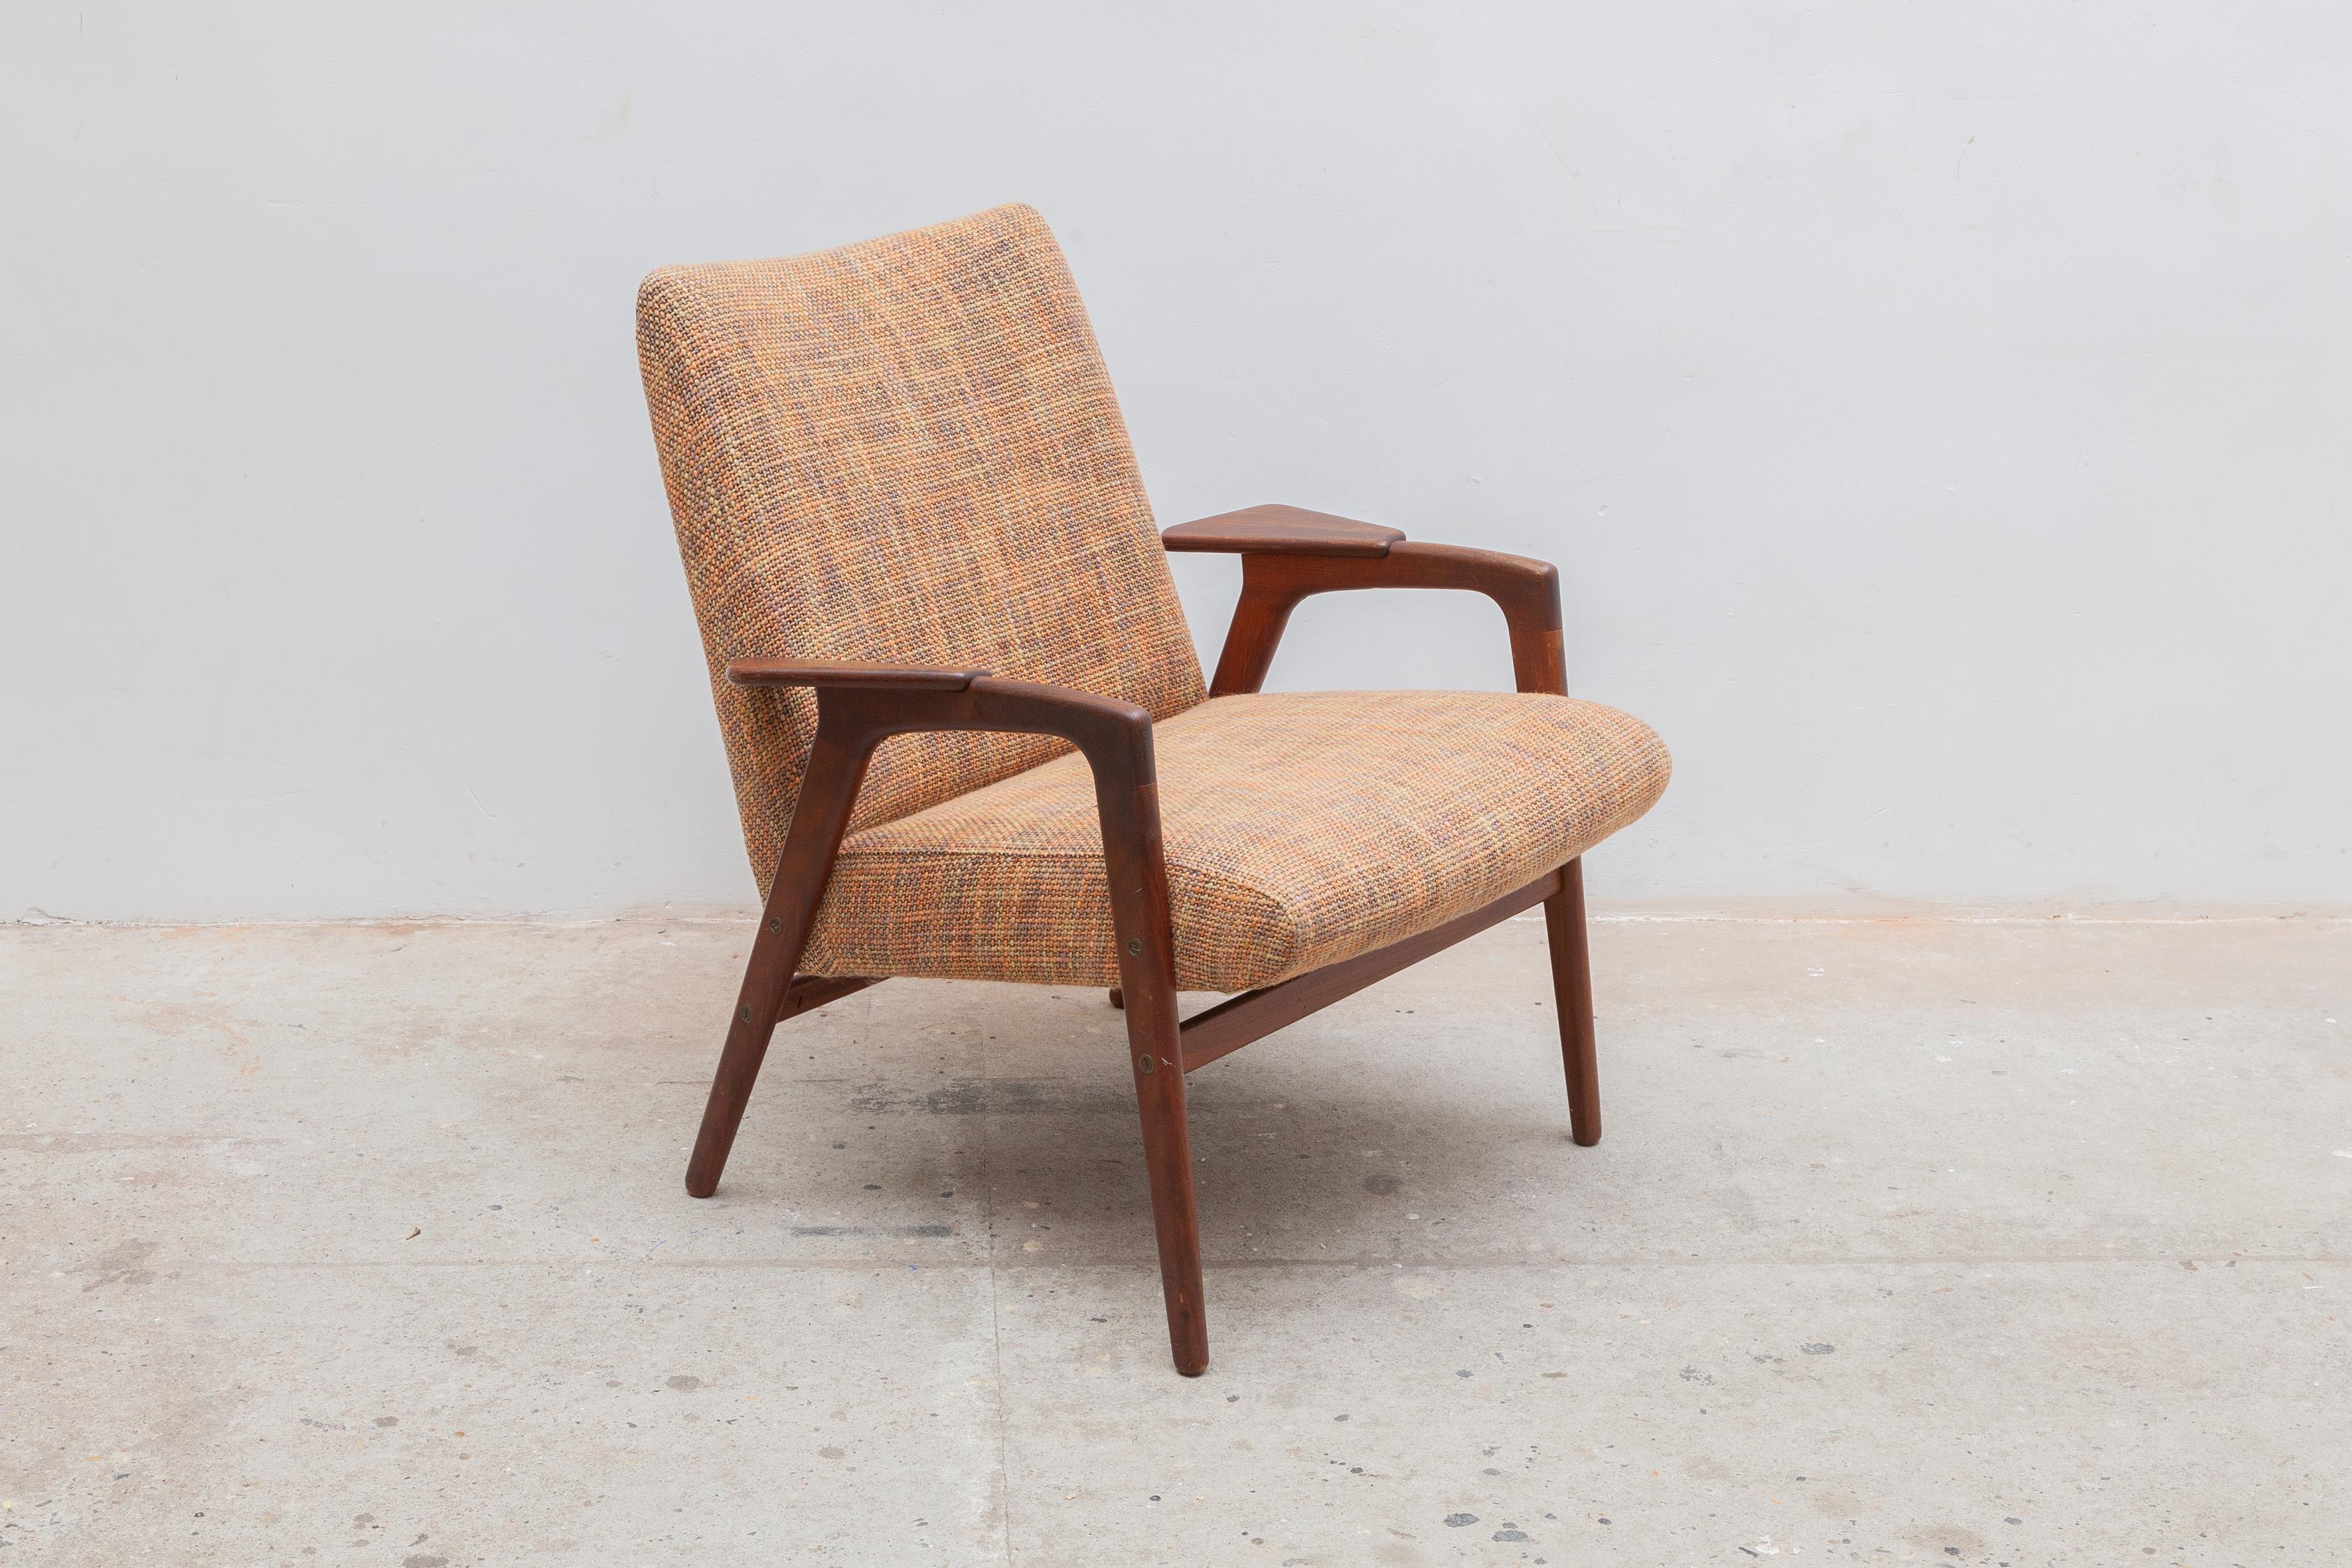 Mid-20th Century Pastoe Chairs Set of One Ladies Chair & One Gentleman Chair, Designed by Ekström